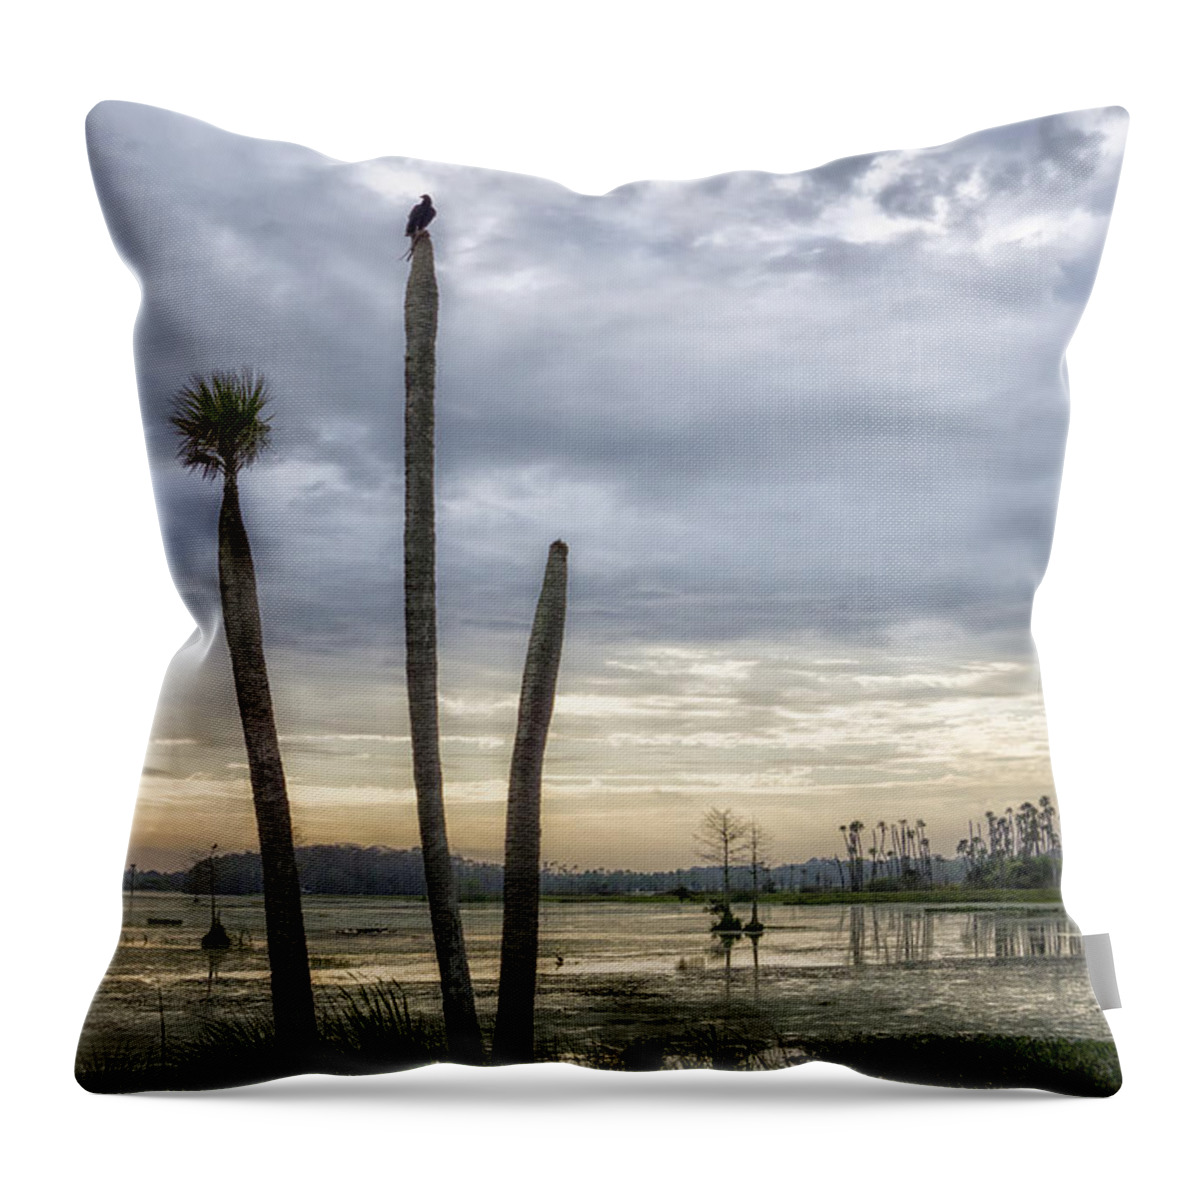 Crystal Yingling Throw Pillow featuring the photograph Three Sticks by Ghostwinds Photography